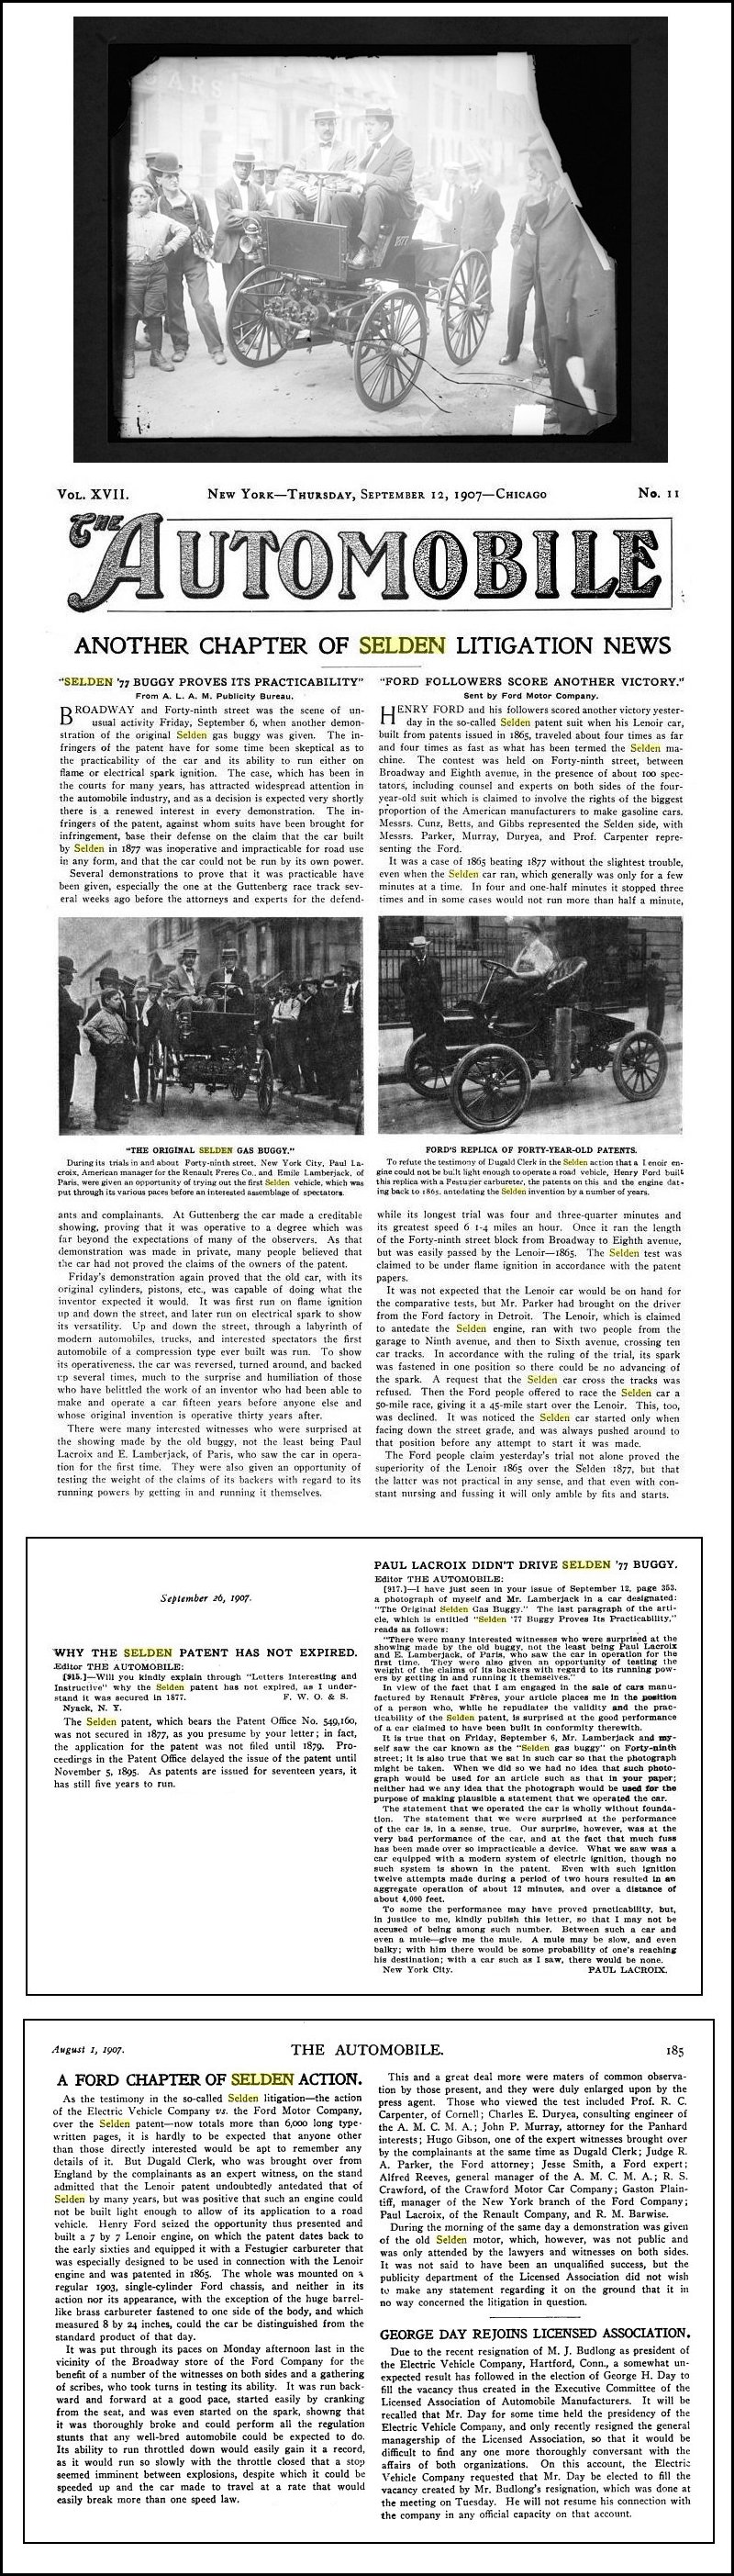 QUESTIONS AND ANSWERS FROM THE GAS ENGINE (1907): Gas Engine